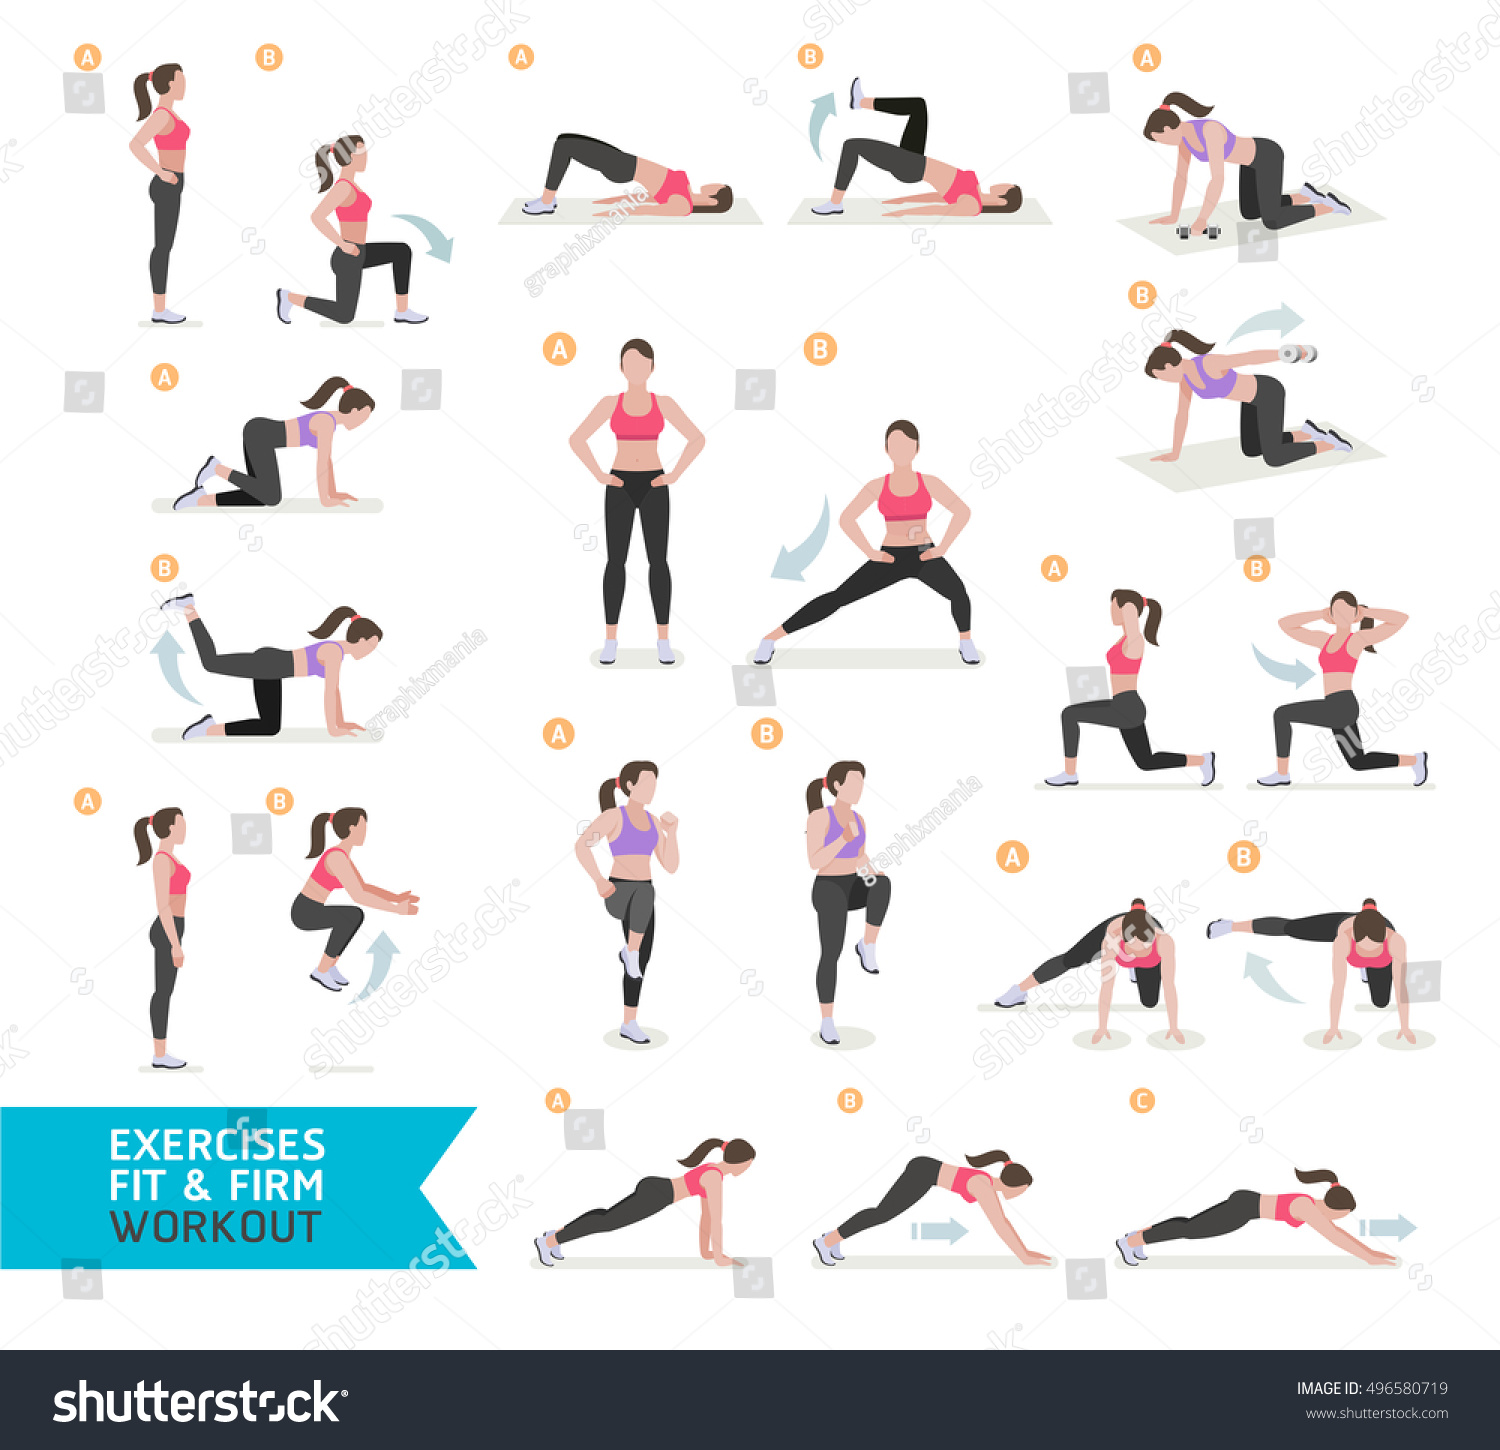 stock-vector-woman-workout-fitness-aerobic-and-exercises-vector-illustration-496580719.jpg